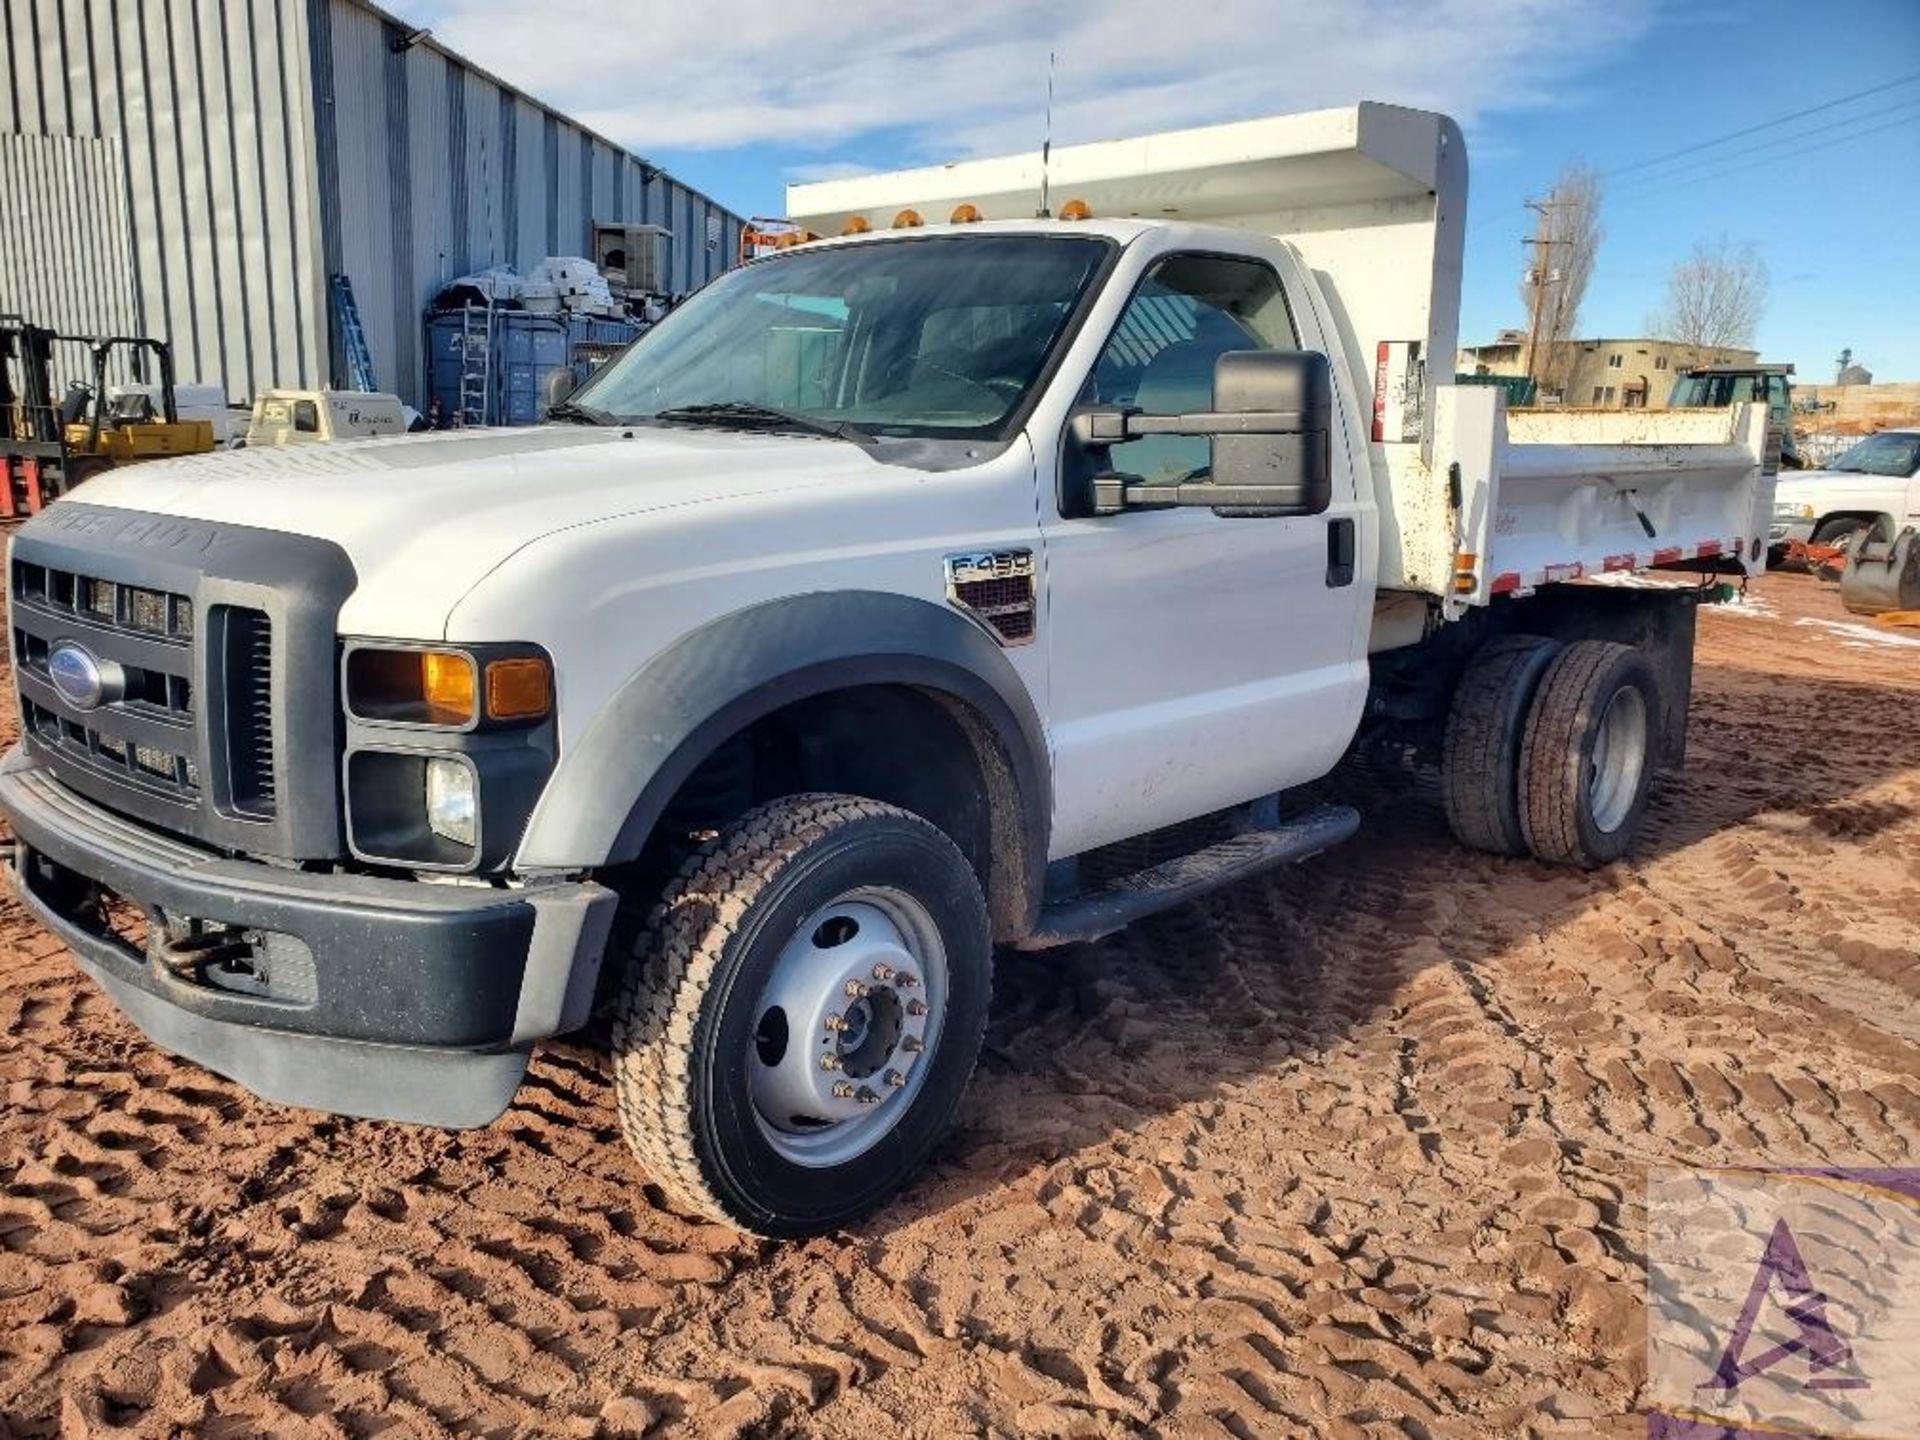 2008 Ford F-450 4X4 Dump Truck - Image 11 of 54